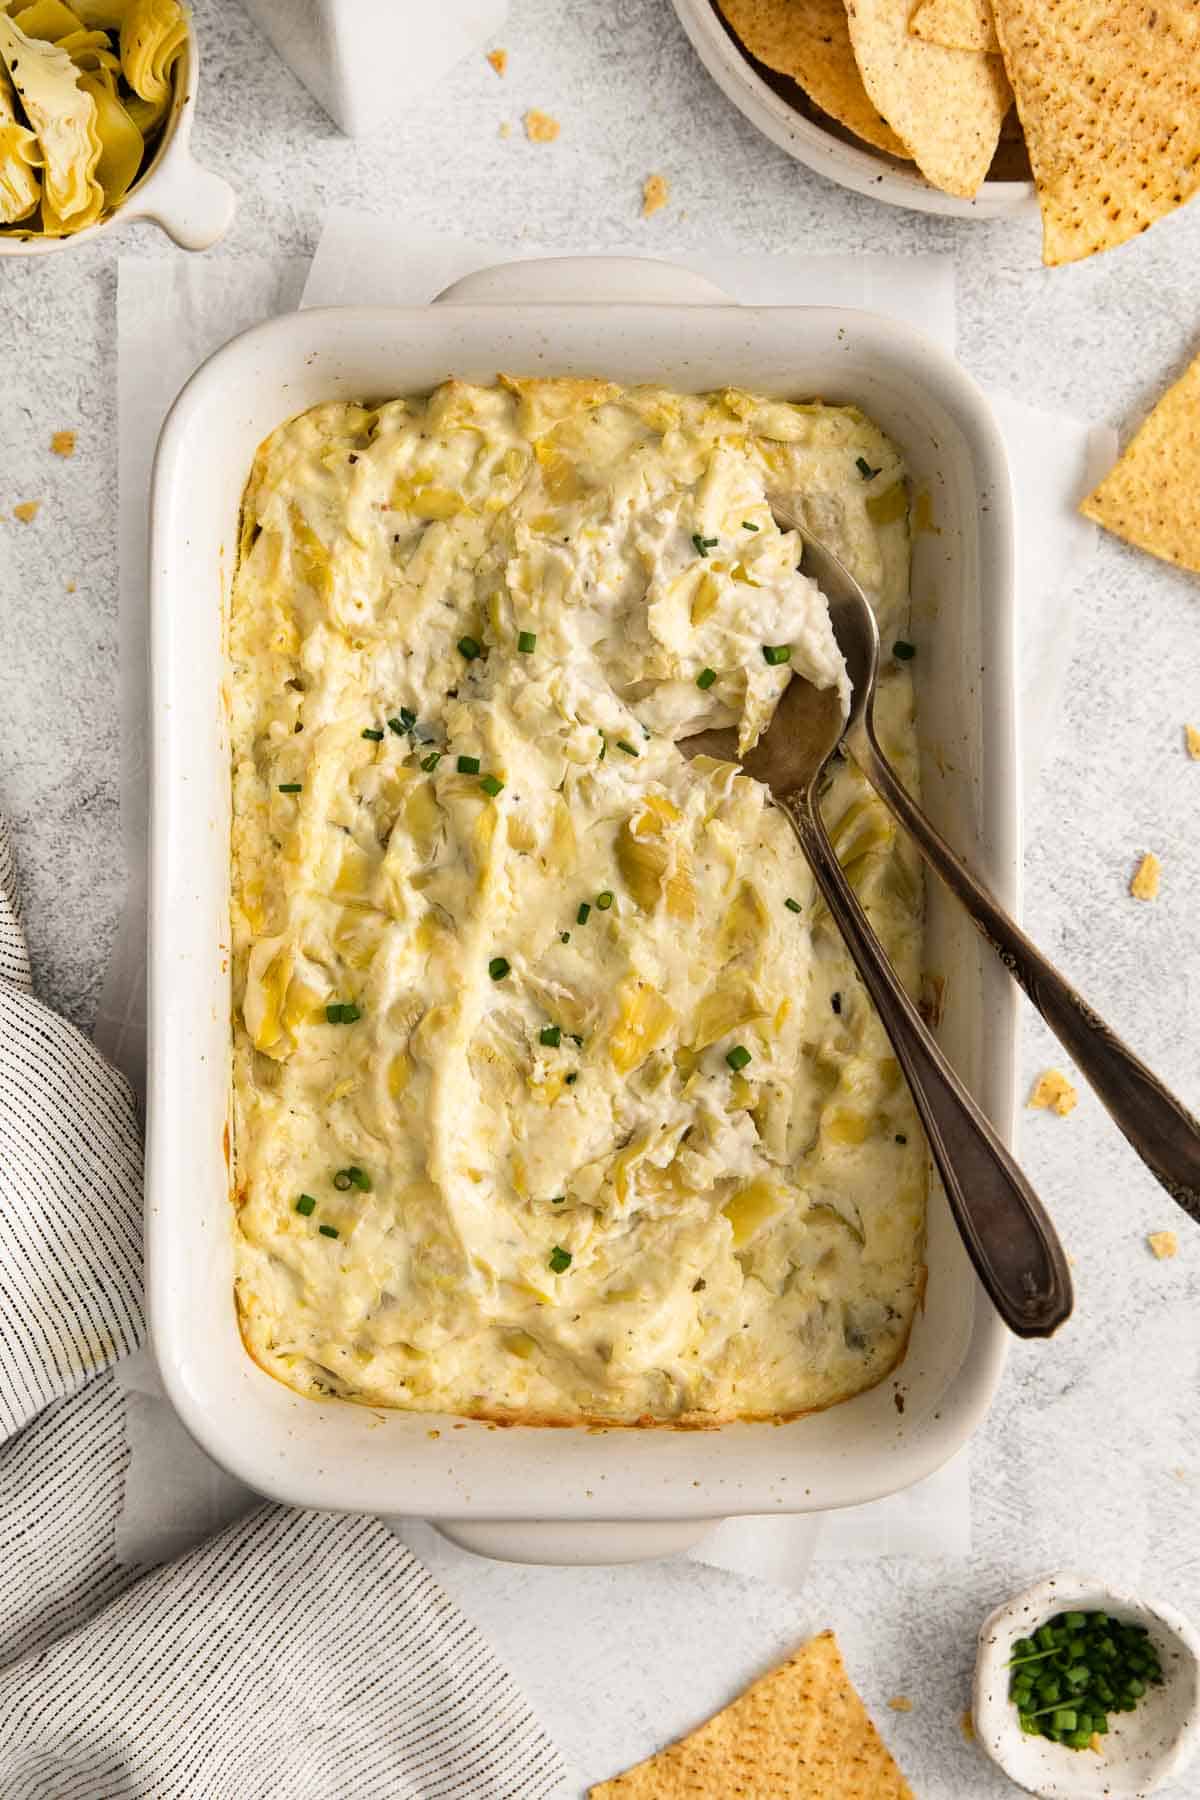 Artichoke dip in a baking dish, with serving spoons placed in the dish